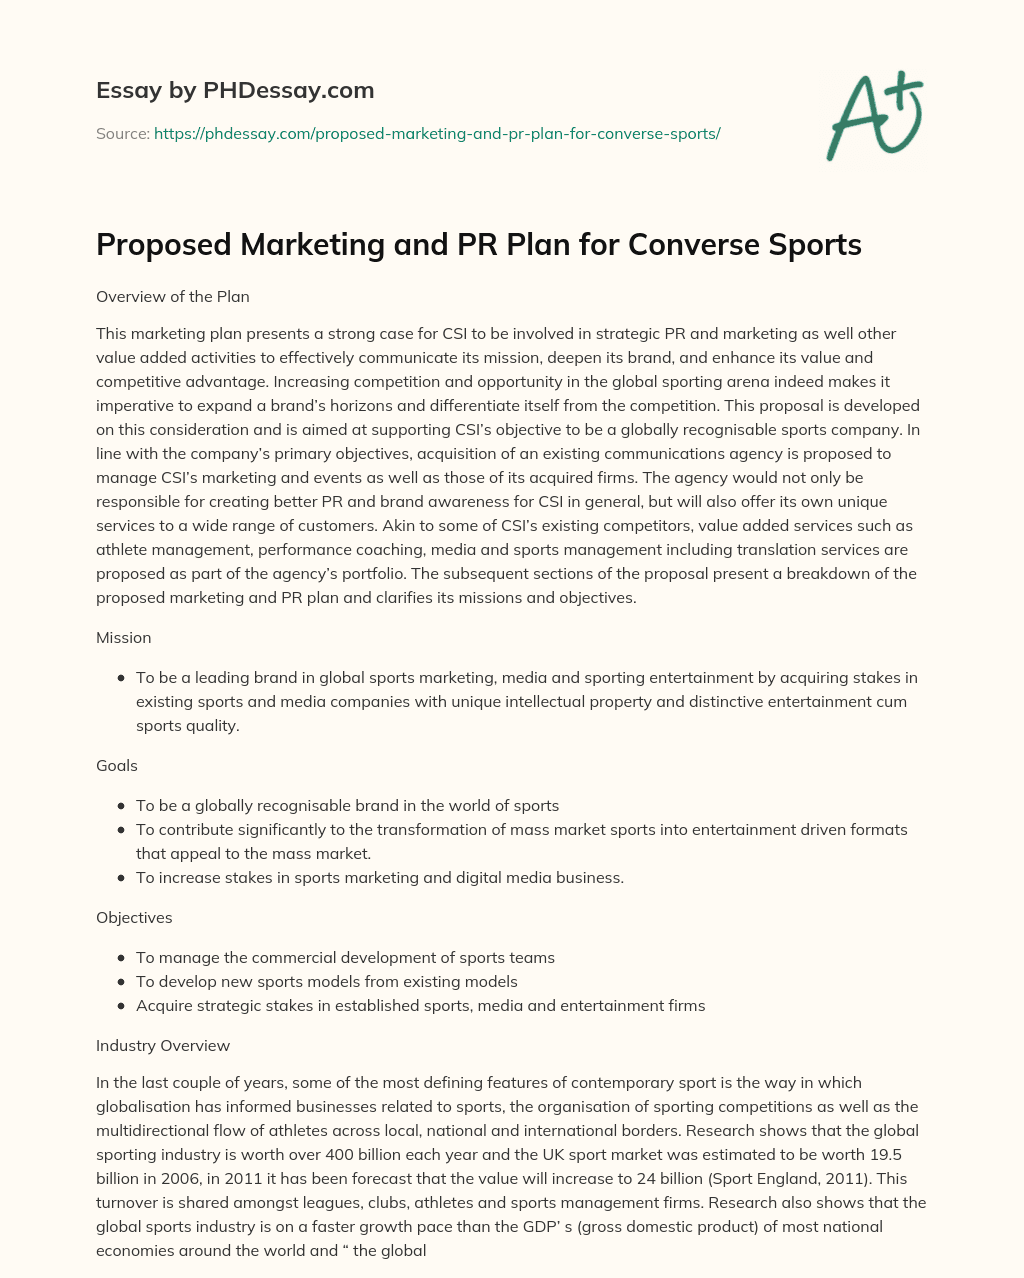 Proposed Marketing and PR Plan for Converse Sports essay